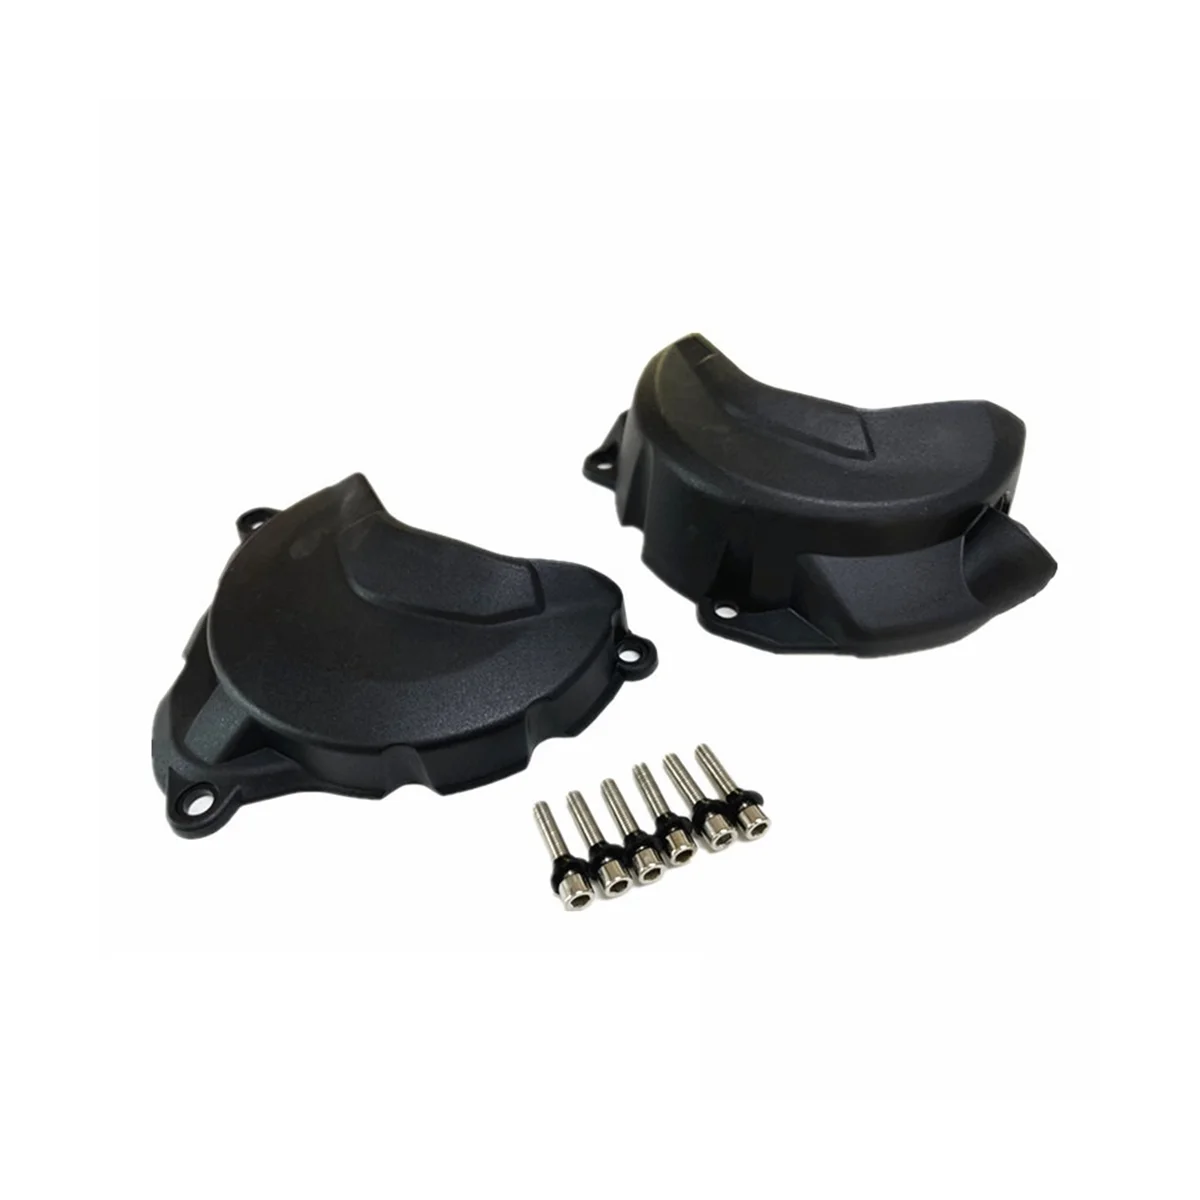 

Motorcycles Engine Cylinder Cover Head Protection Clutch Guards for F750GS F850GS F900R F900XR F 850 GS